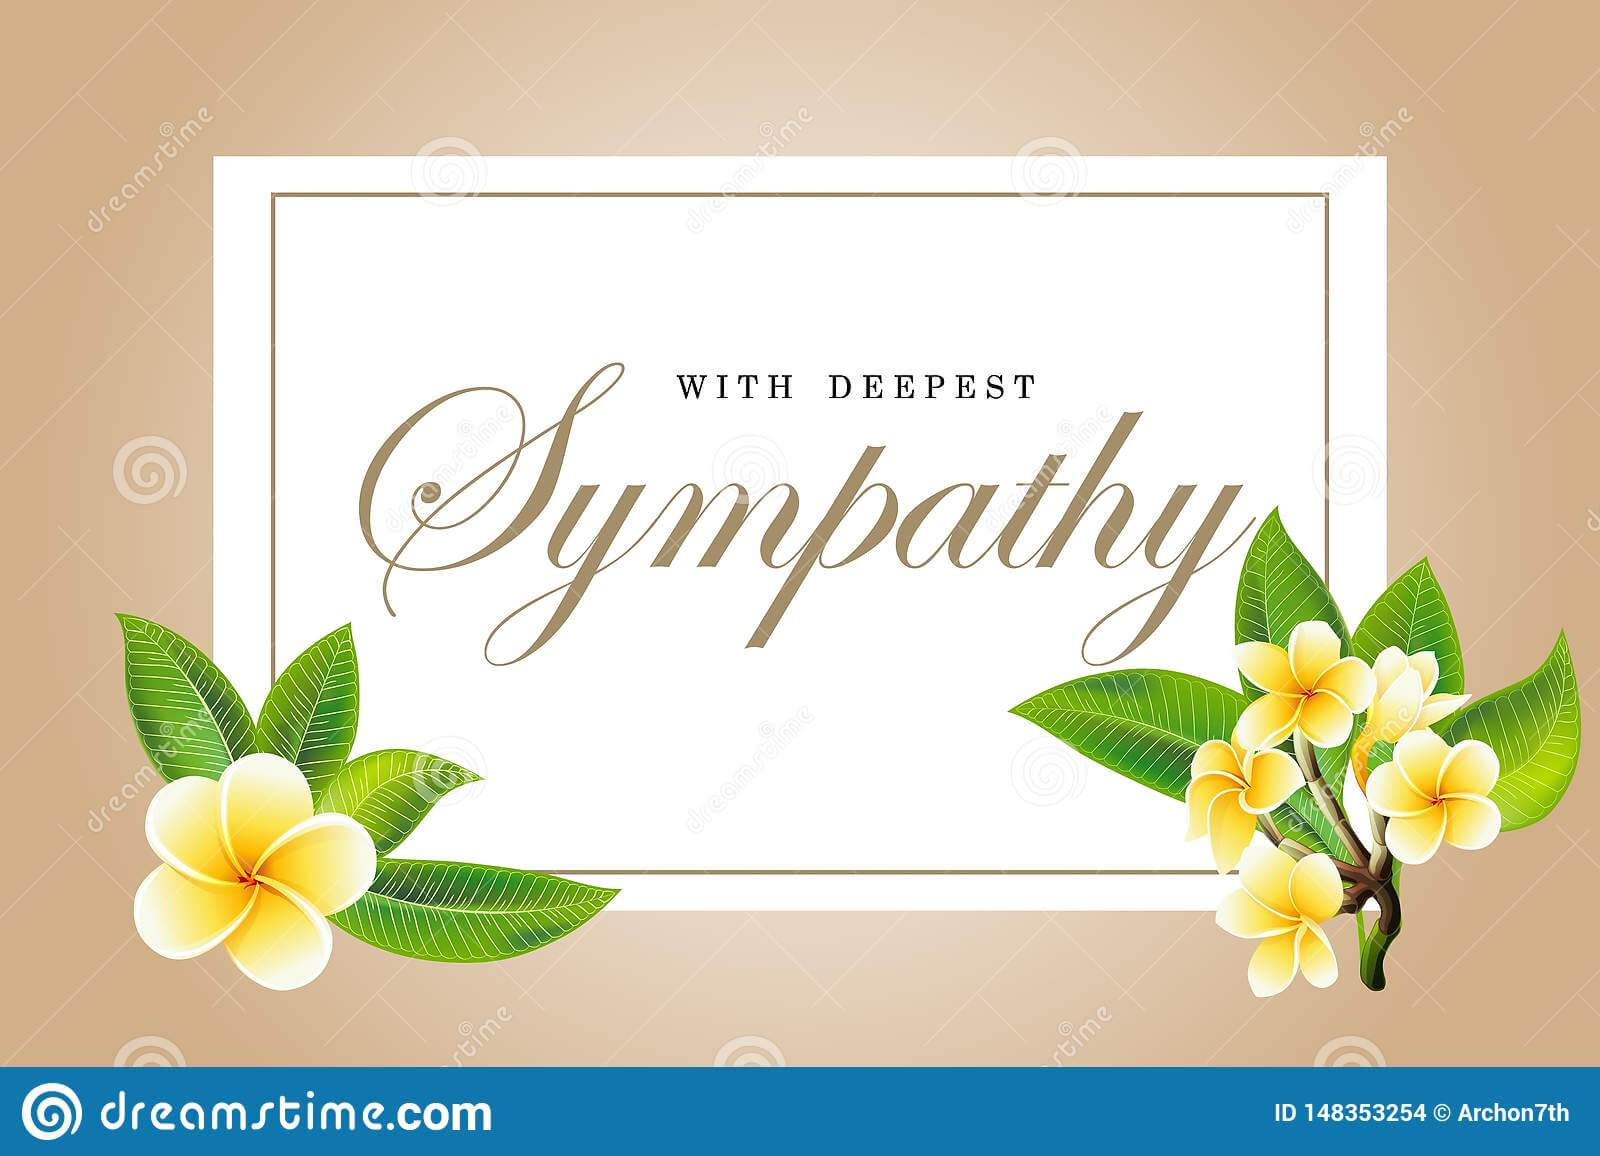 Condolences Sympathy Card Floral Frangipani Or Plumeria Within Sorry For Your Loss Card Template